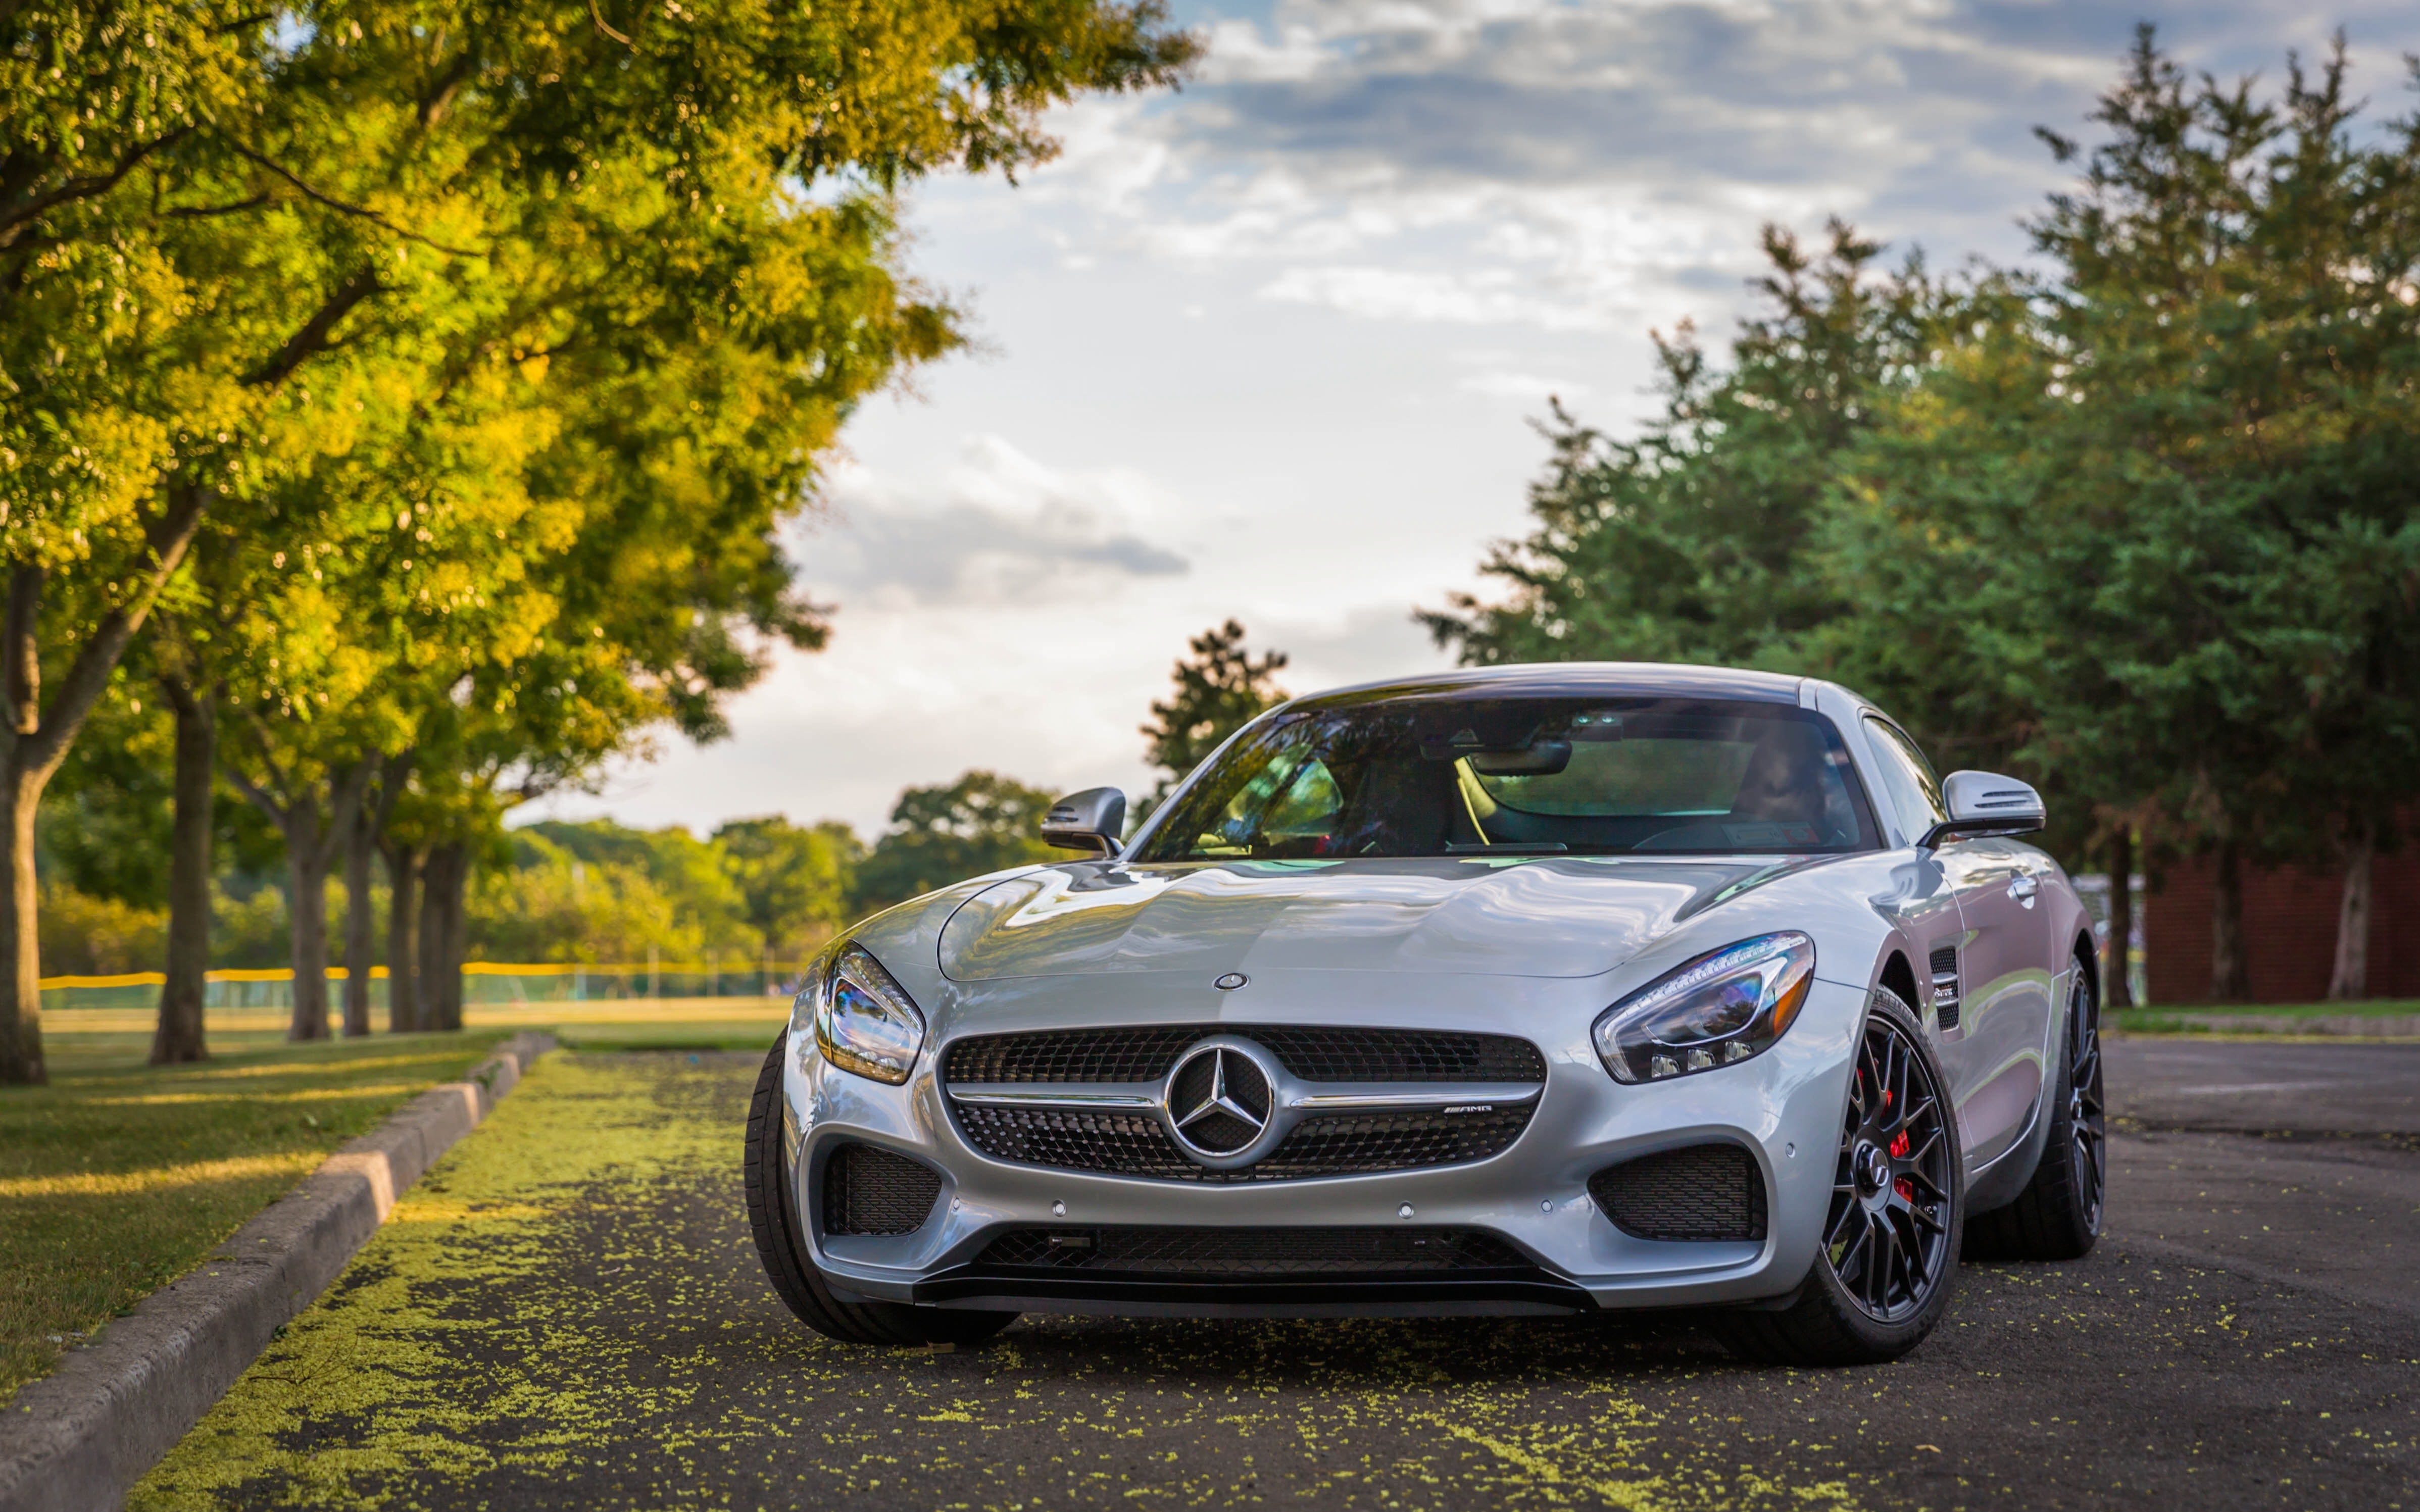 silver Mercedes-Benz coupe, mercedes-amg gt s, side view, car